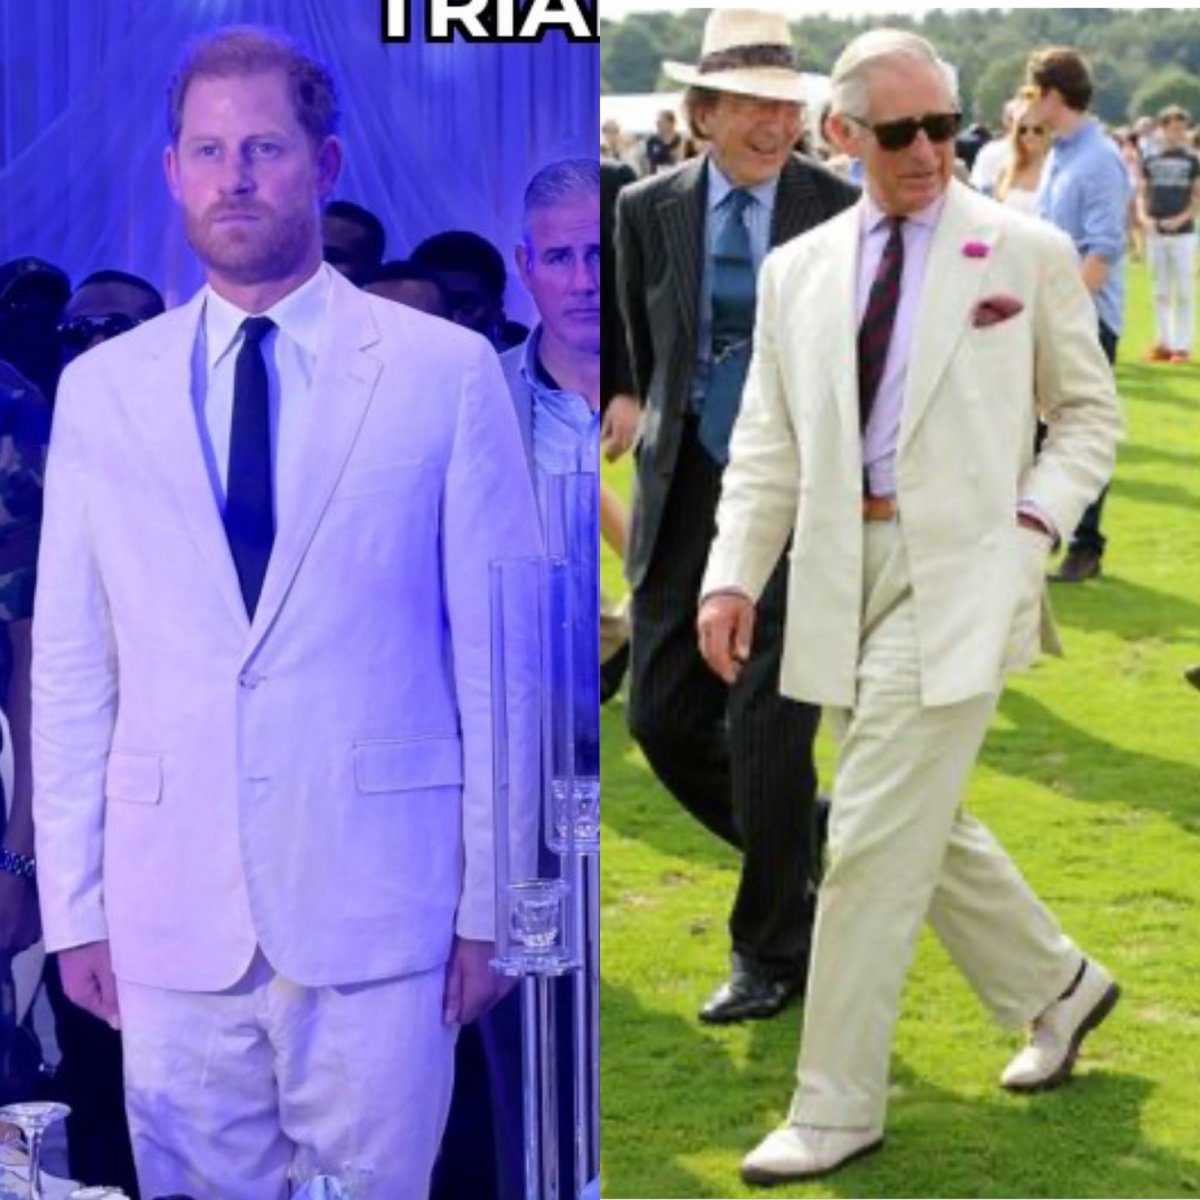 King Charles’ master class on how to wear a white suit!

The other is how not to wear it.

No wonder Charles’ elegance is revered worldwide!

#KingCharlesIII